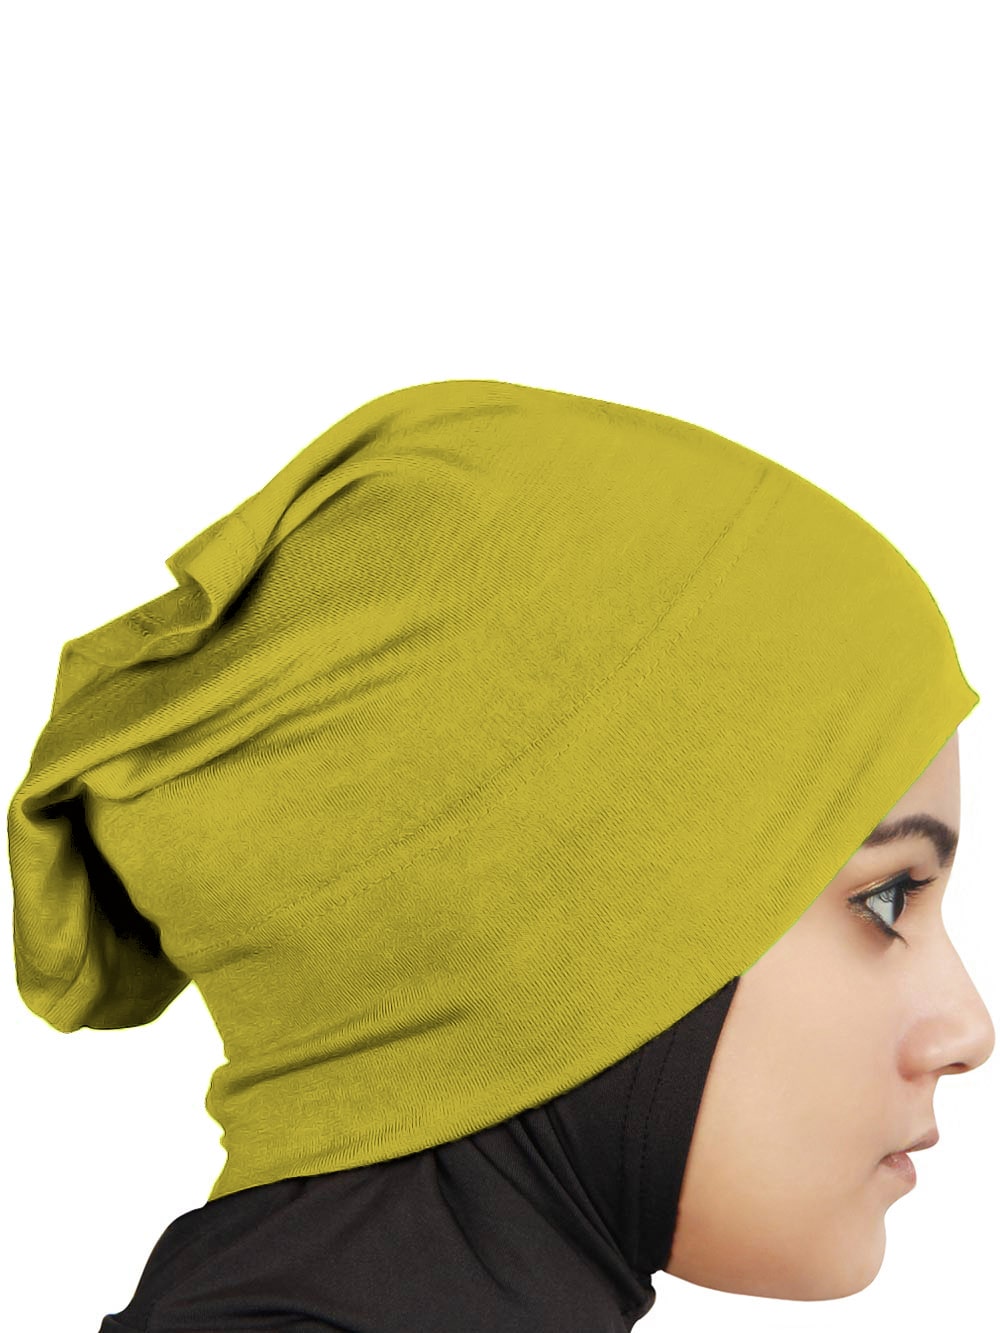 Two Piece Instant Mustard Green Viscose Jersey Hijab